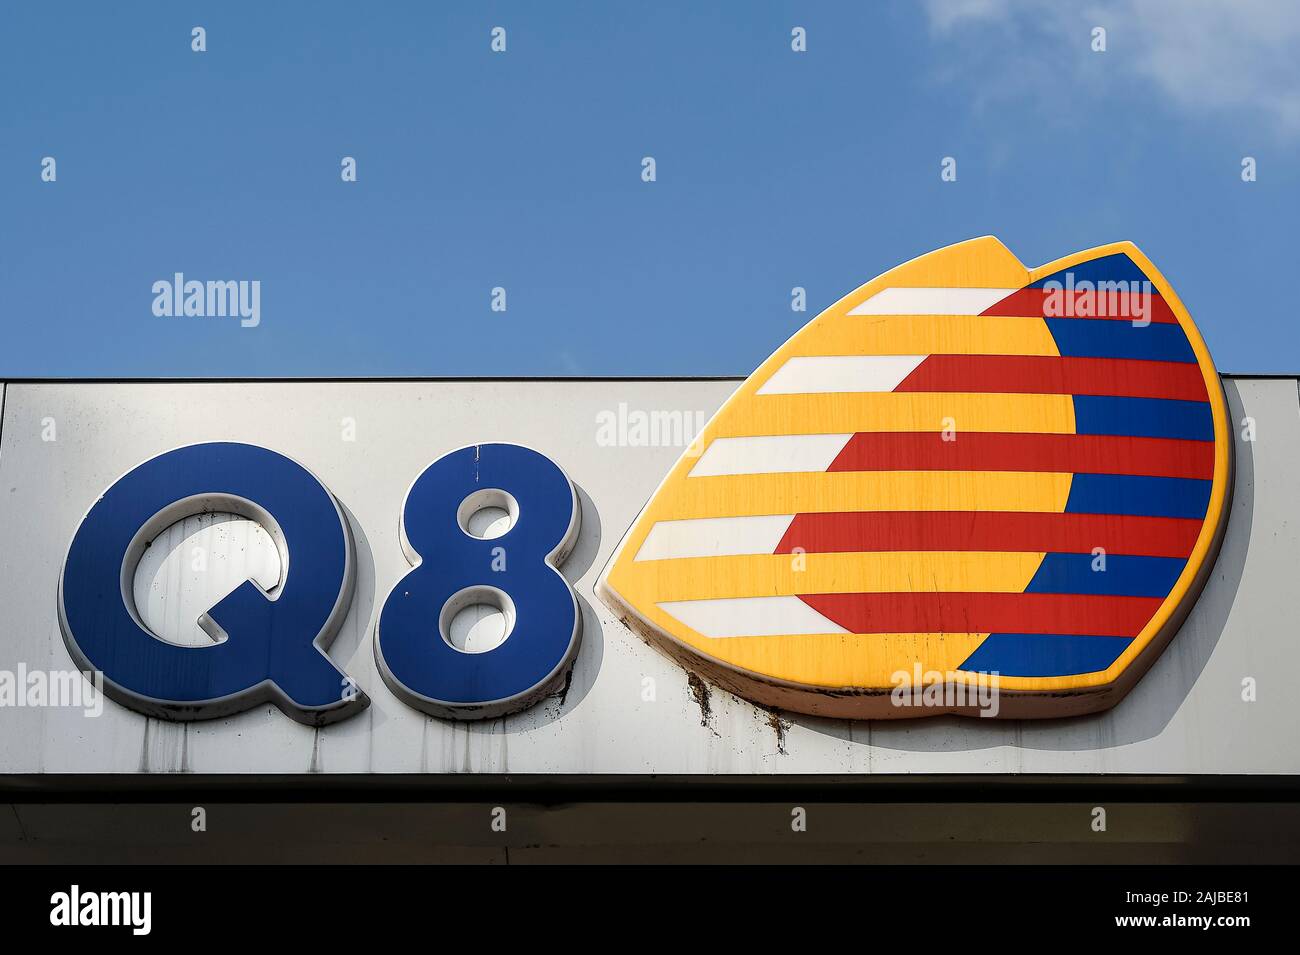 Turin, Italy - 06 November, 2019: The sign for Q8 (Kuwait Petroleum Corporation) is seen at a Q8 gasoline station. Italian trade unions called a two-day (6th and 7th Novembre 2019) petrol station strike. The action is due to new measures being brought in by the government, including the introduction of electronic invoicing. Credit: Nicolò Campo/Alamy Live News Stock Photo